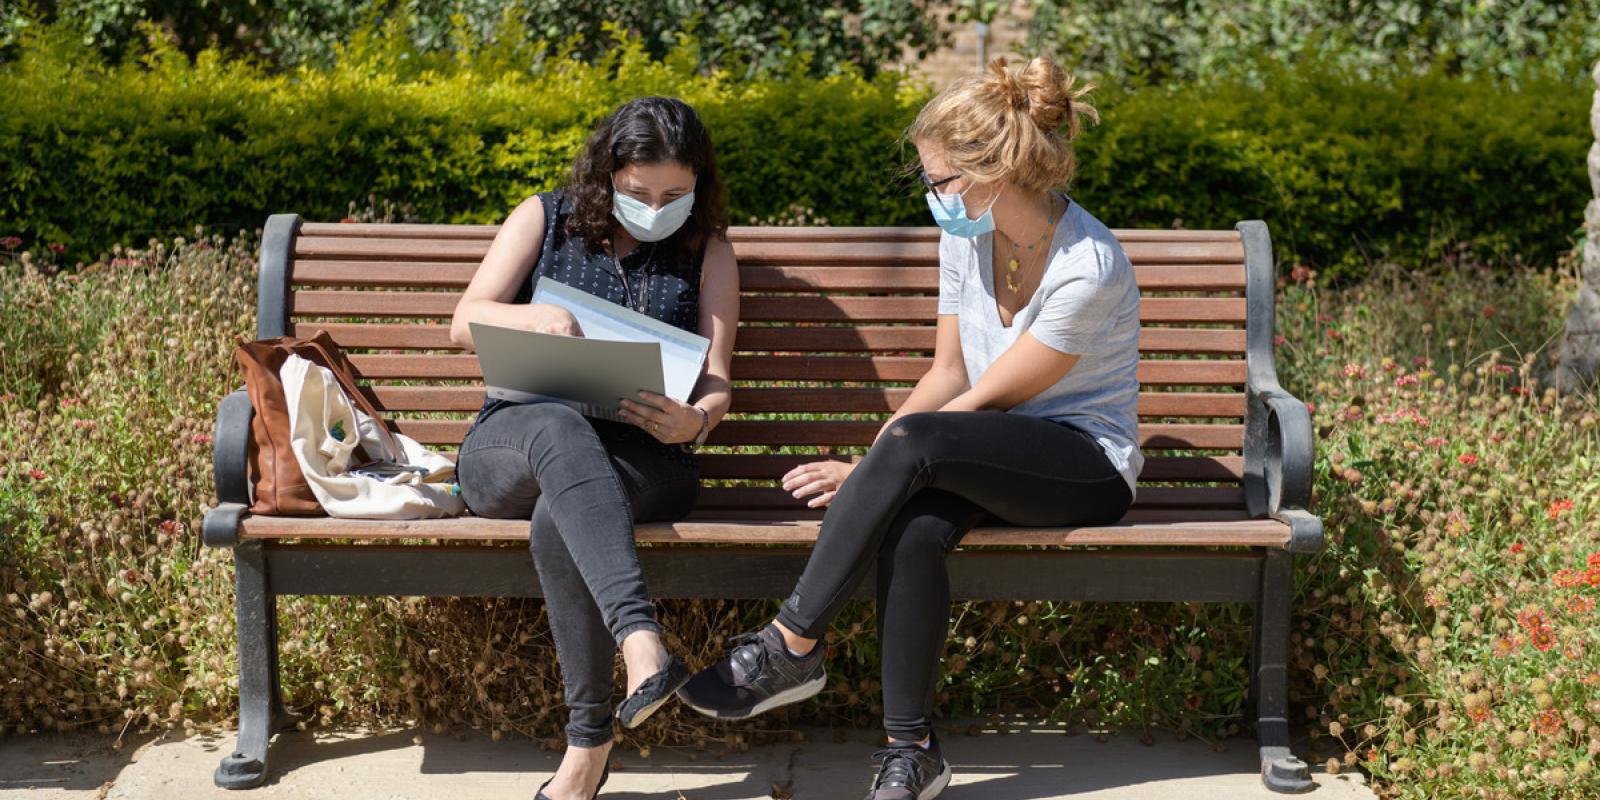 Two masked girls studying on a bench